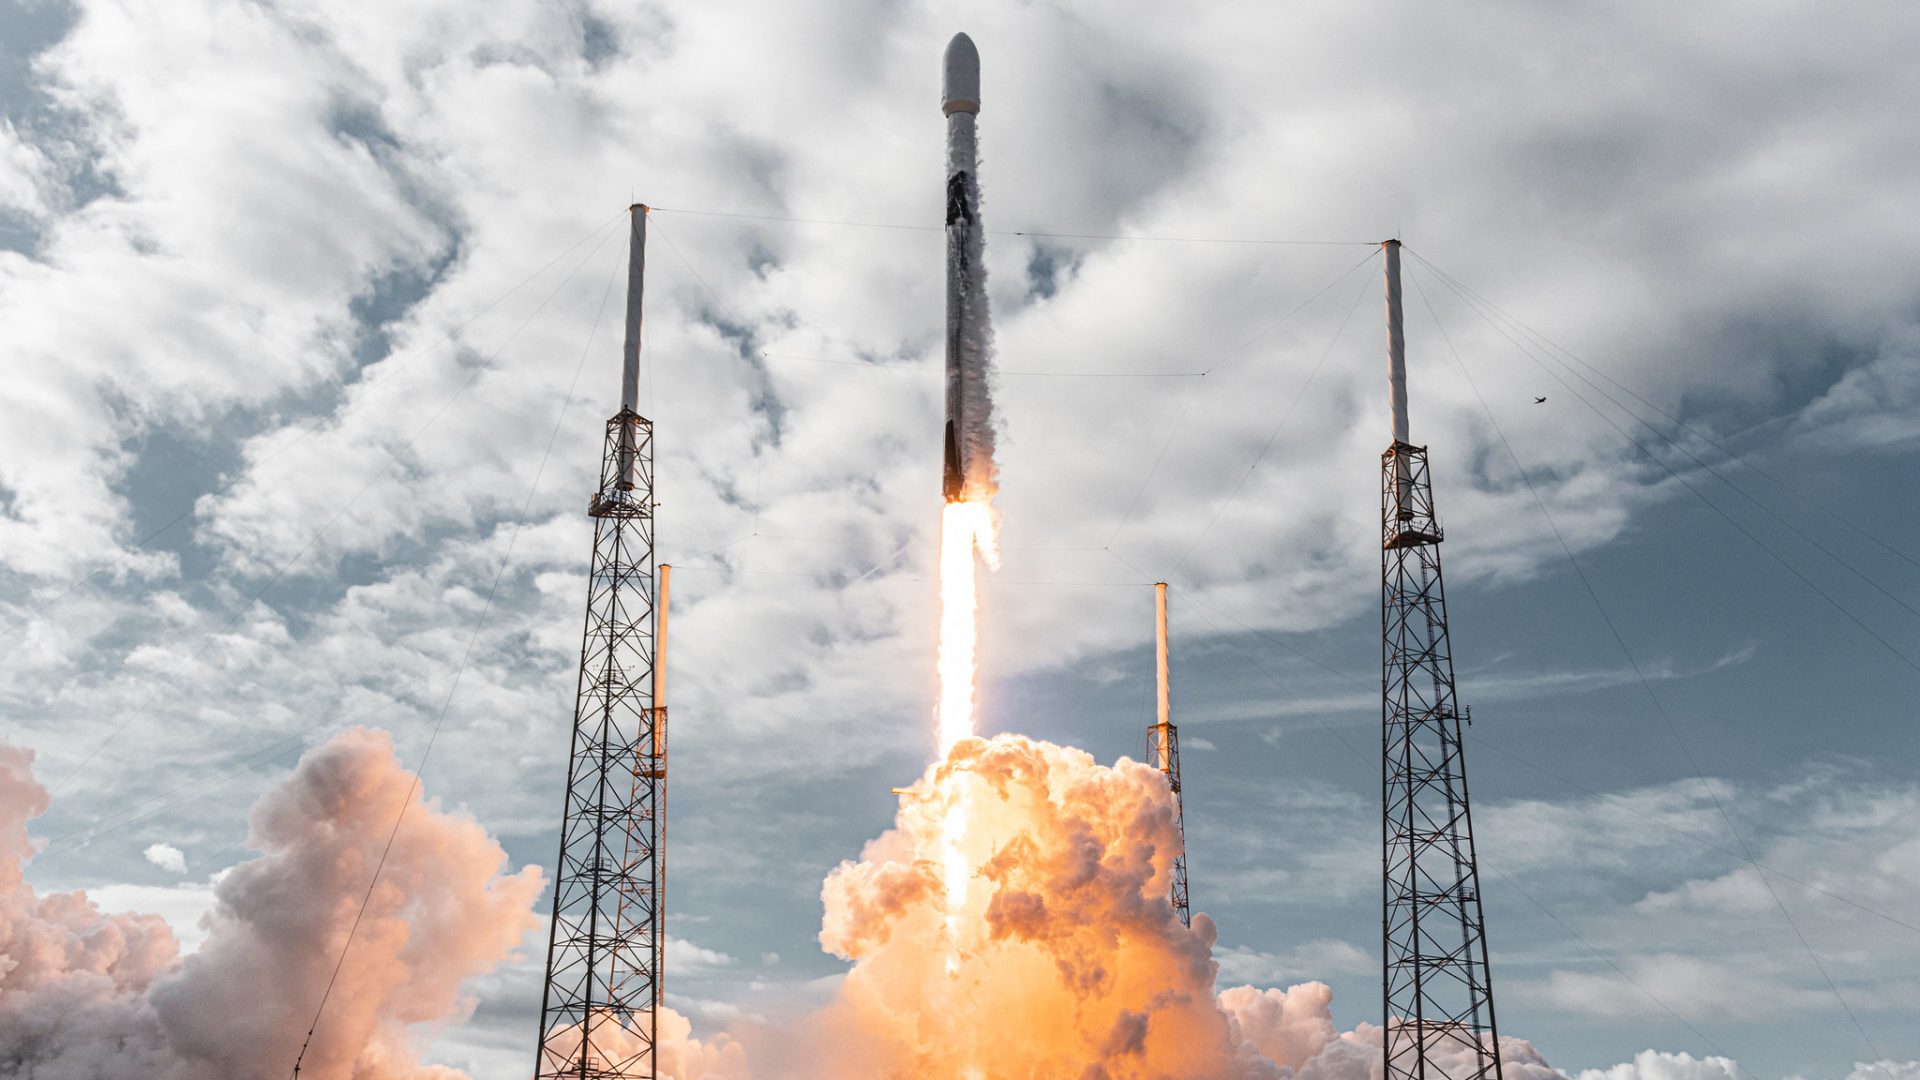 SpaceX delays commence of Transporter-2 rideshare mission on Falcon 9 rocket